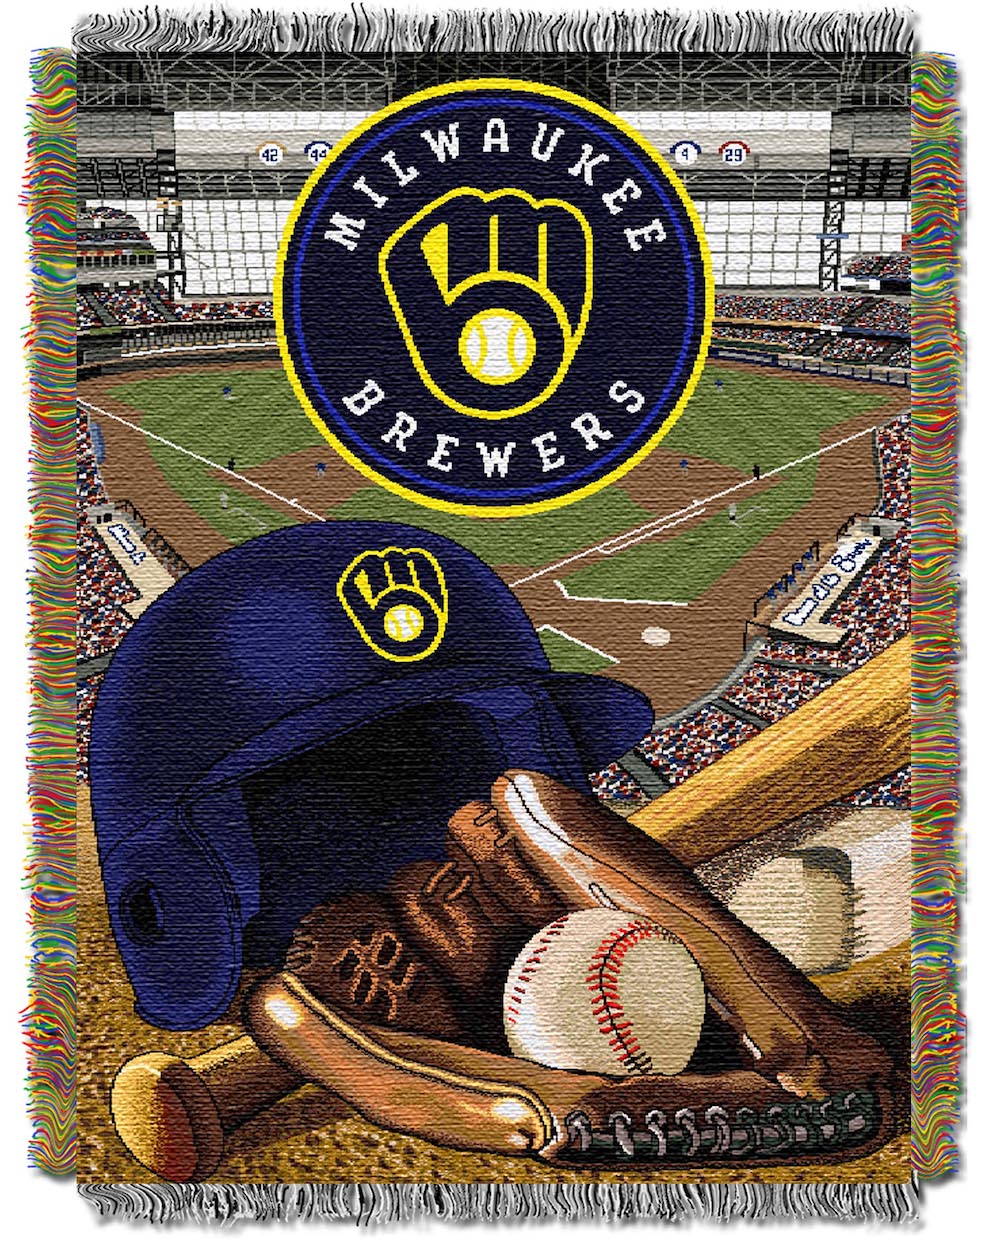 Milwaukee Brewers woven home field tapestry